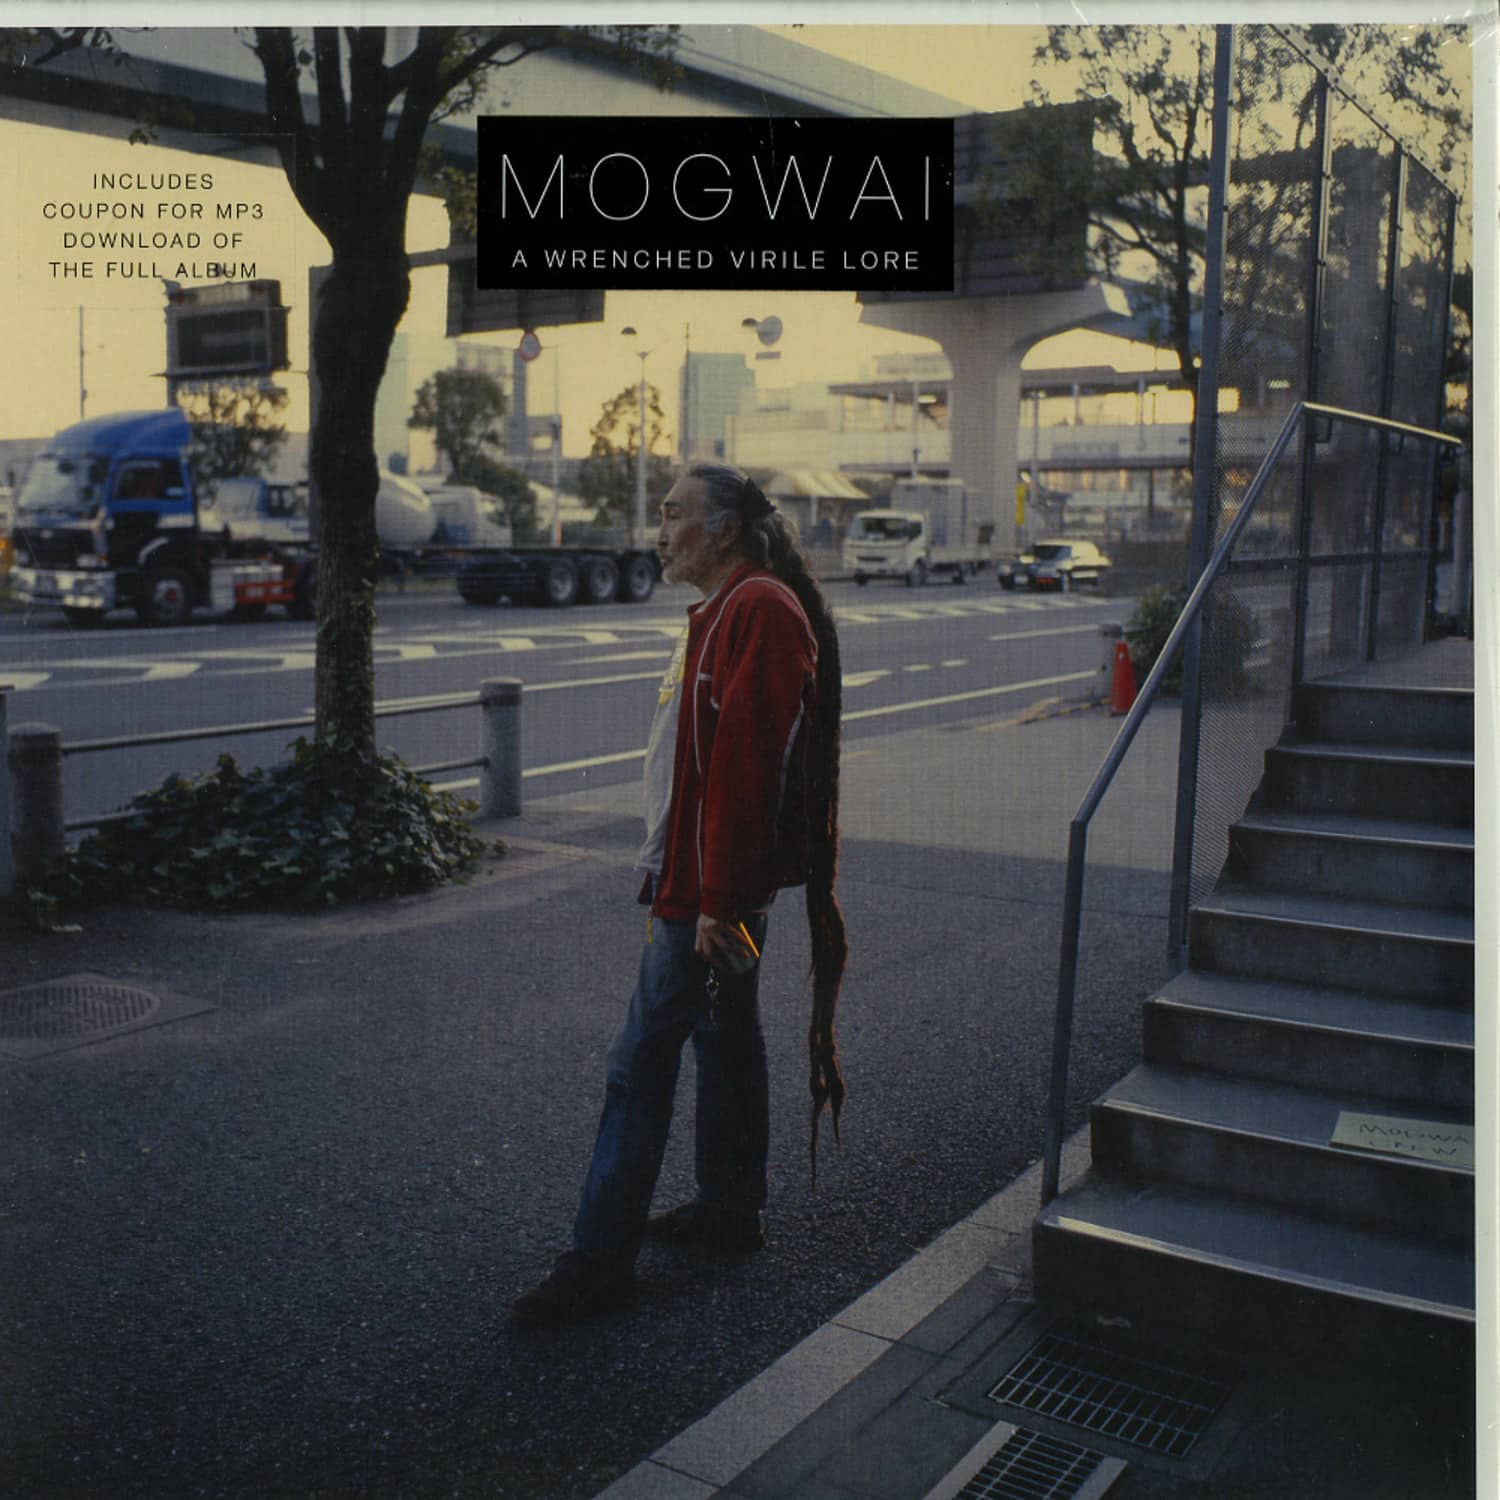 Mogwai - A WRENCHED VIRILE LORE 